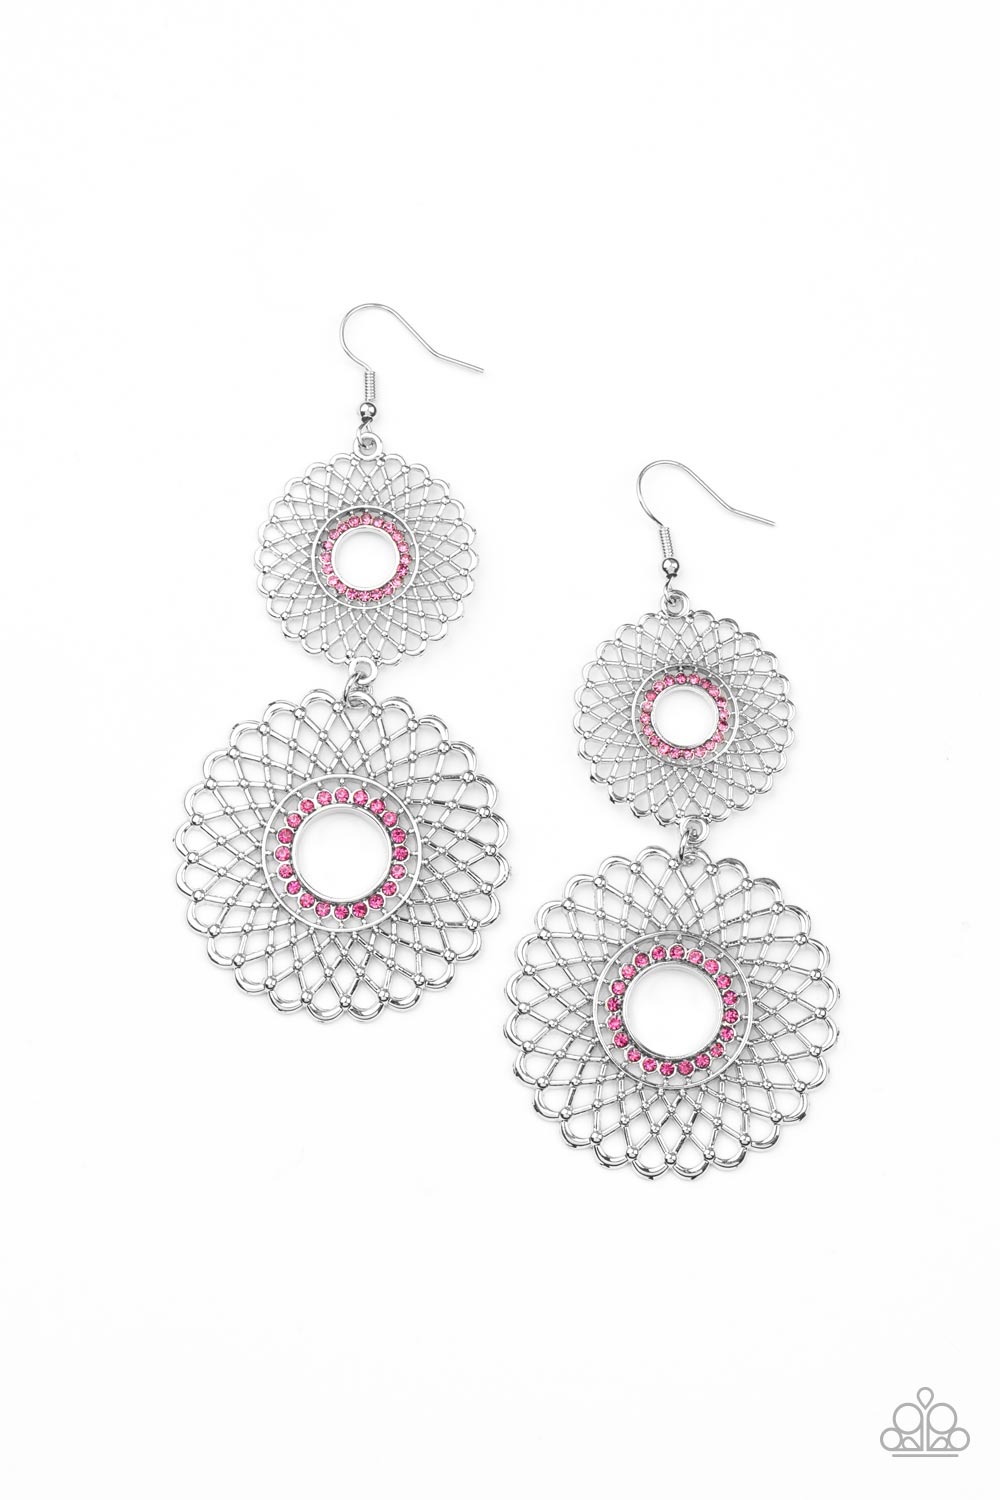 Regal Roulette - Pink - Silver Floral Earrings - Paparazzi Accessories - two dizzying silver floral medallions. Rings of dainty pink rhinestones adorn the center, adding a dash of dazzle. Earring attaches to a standard fishhook fitting. Sold as one pair of earrings.